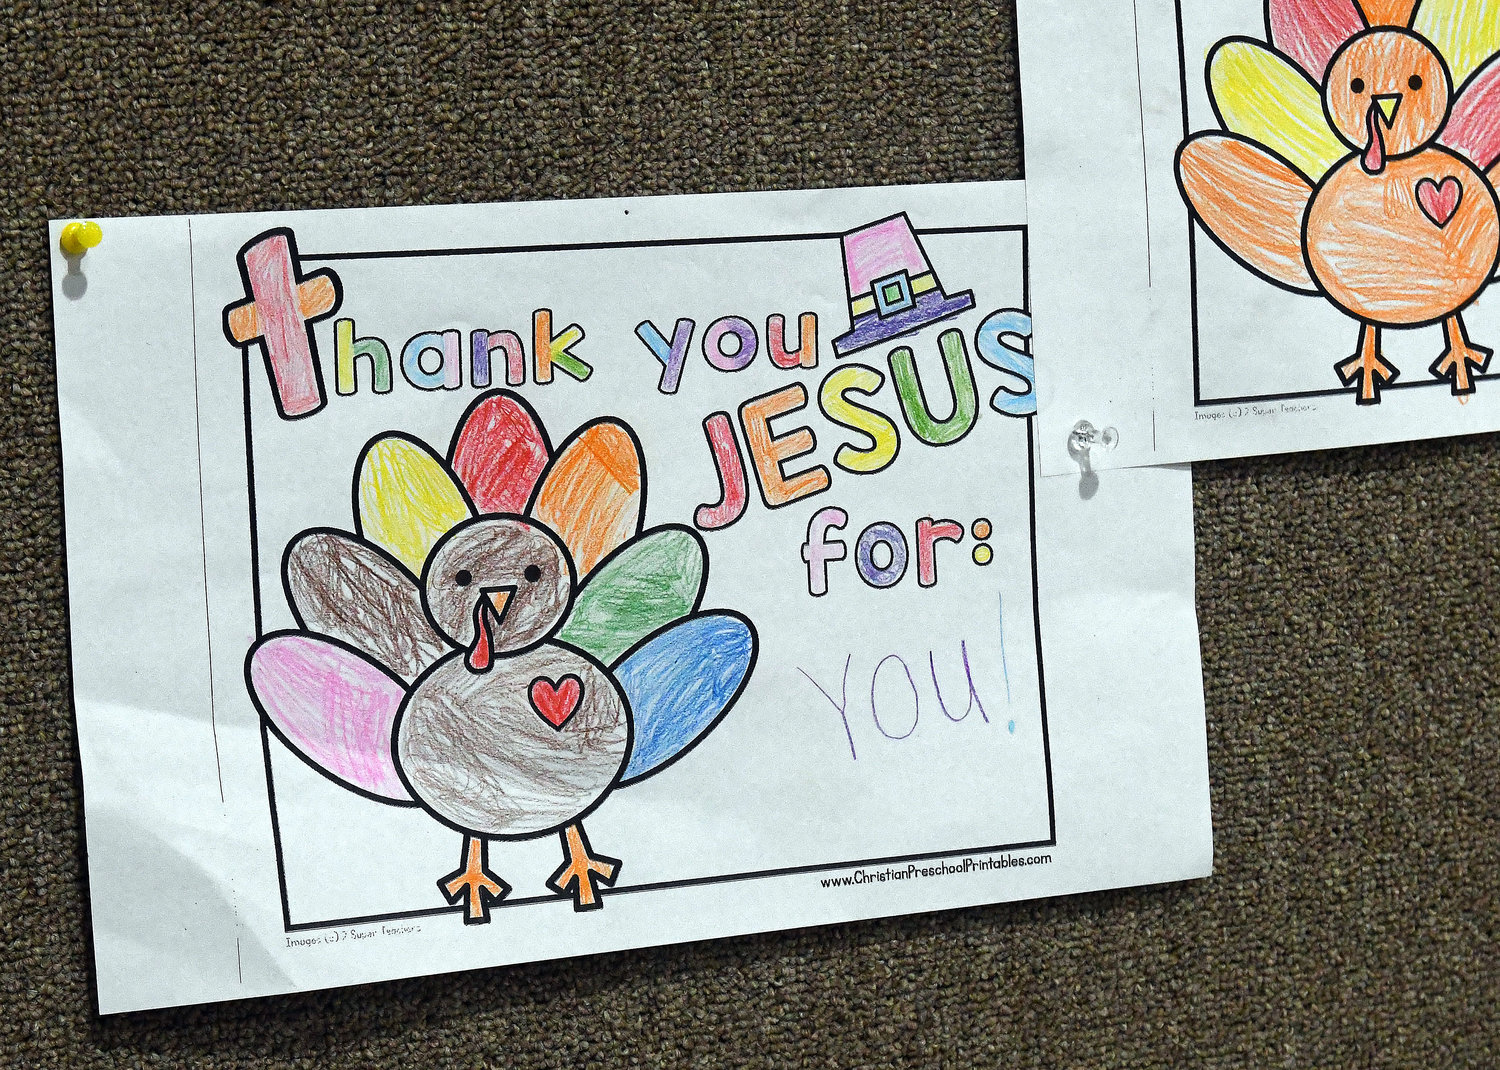 Artwork on a church bulletin board features thank you messages created by church youngsters.